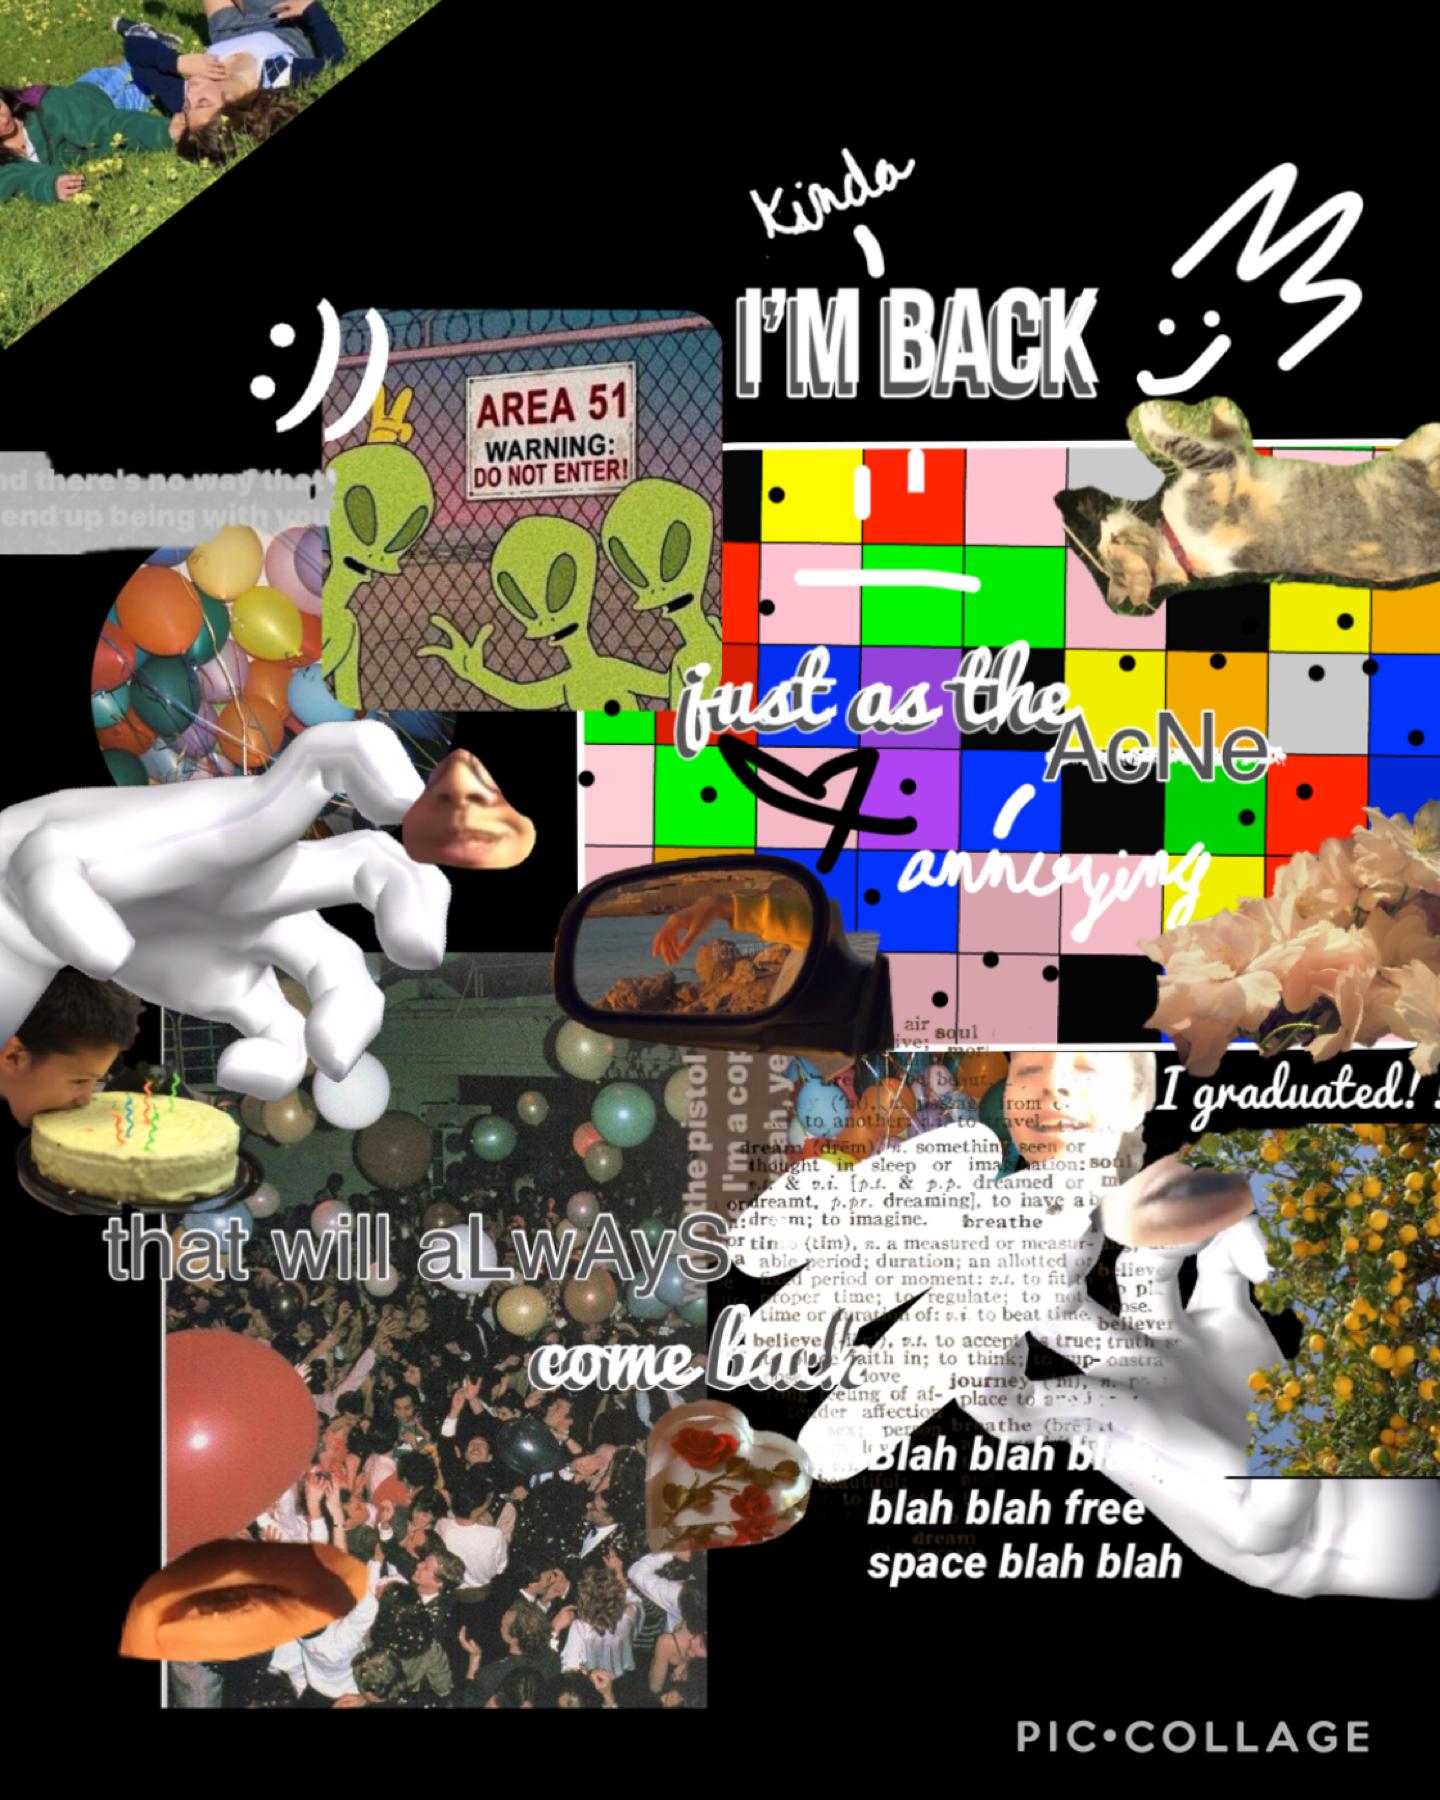 IM (KiNdA) BACKK...tap or you are a jerk
Just kiddin’ LSKSKS

SO...you can see this bad collage, has some eyes, and some pics of some friends 🥴shhh
Any question? I’ll answer :)) (read more in comments) 